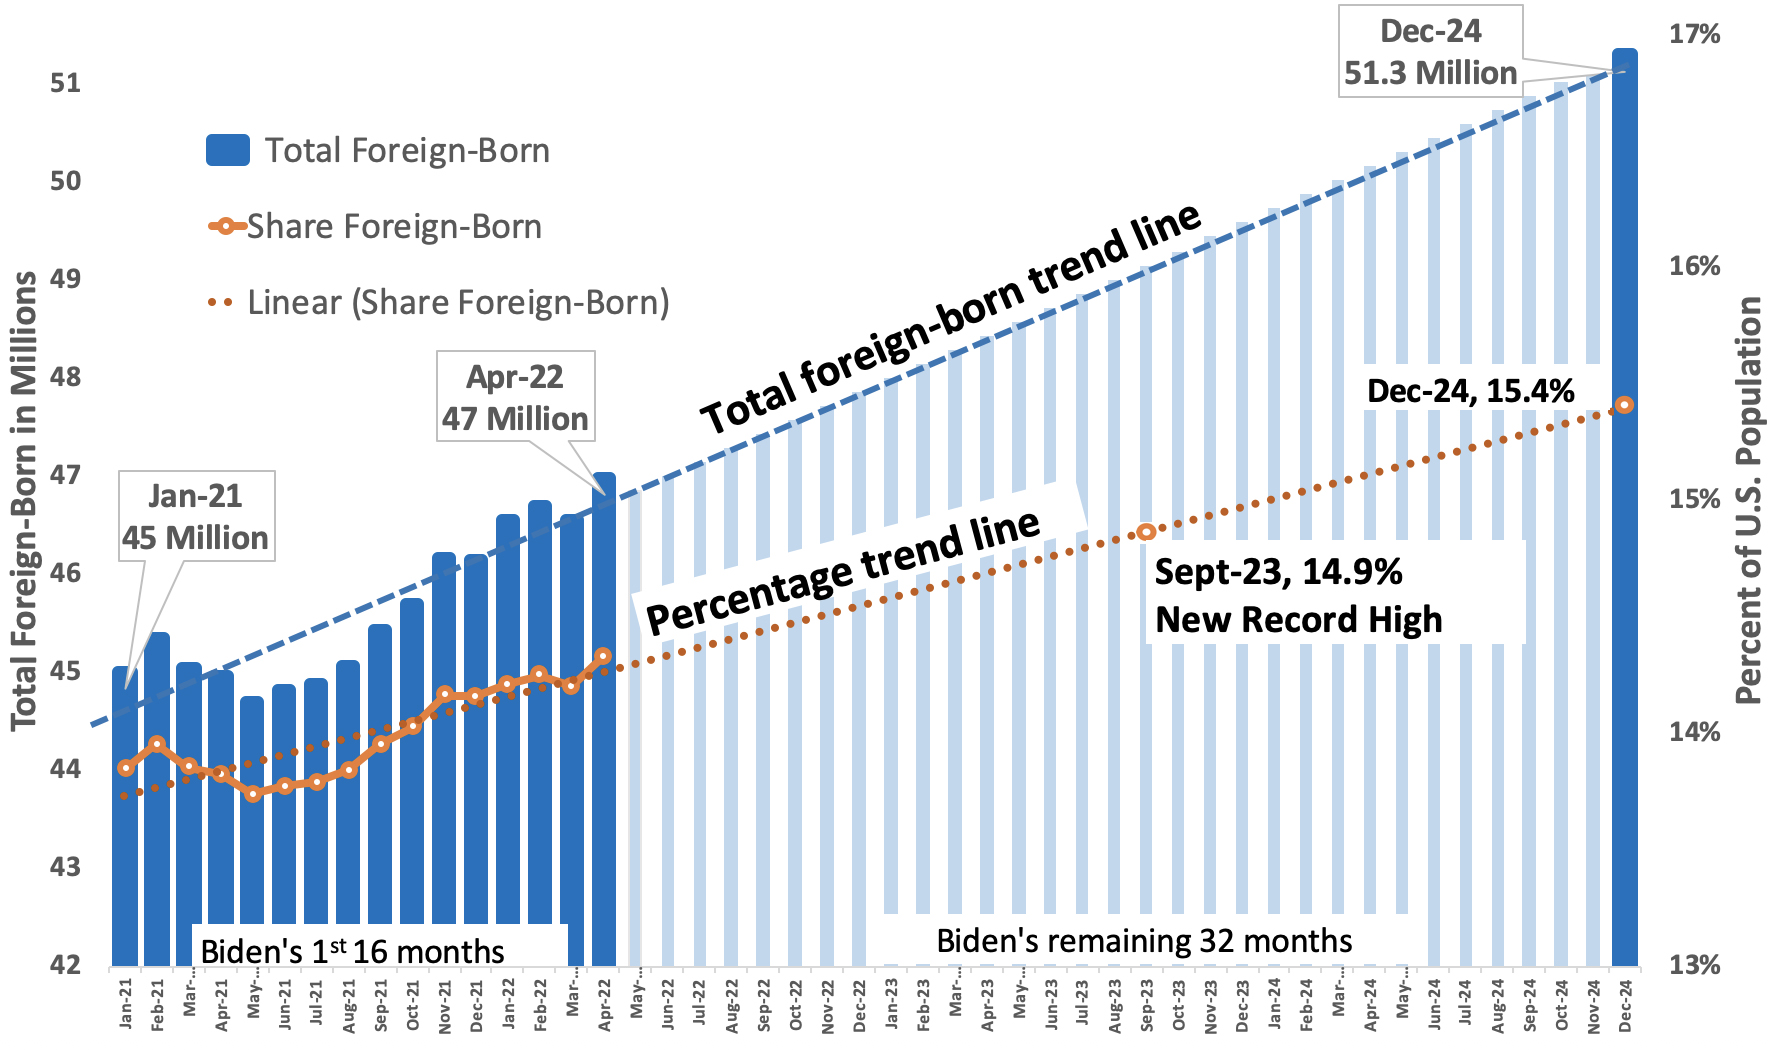 If the foreign-born population continues to grow at the current pace, it will reach 51.3 million and 15.4 percent of the U.S. population by the end of Biden's term; both will be new records highs in U.S. history.